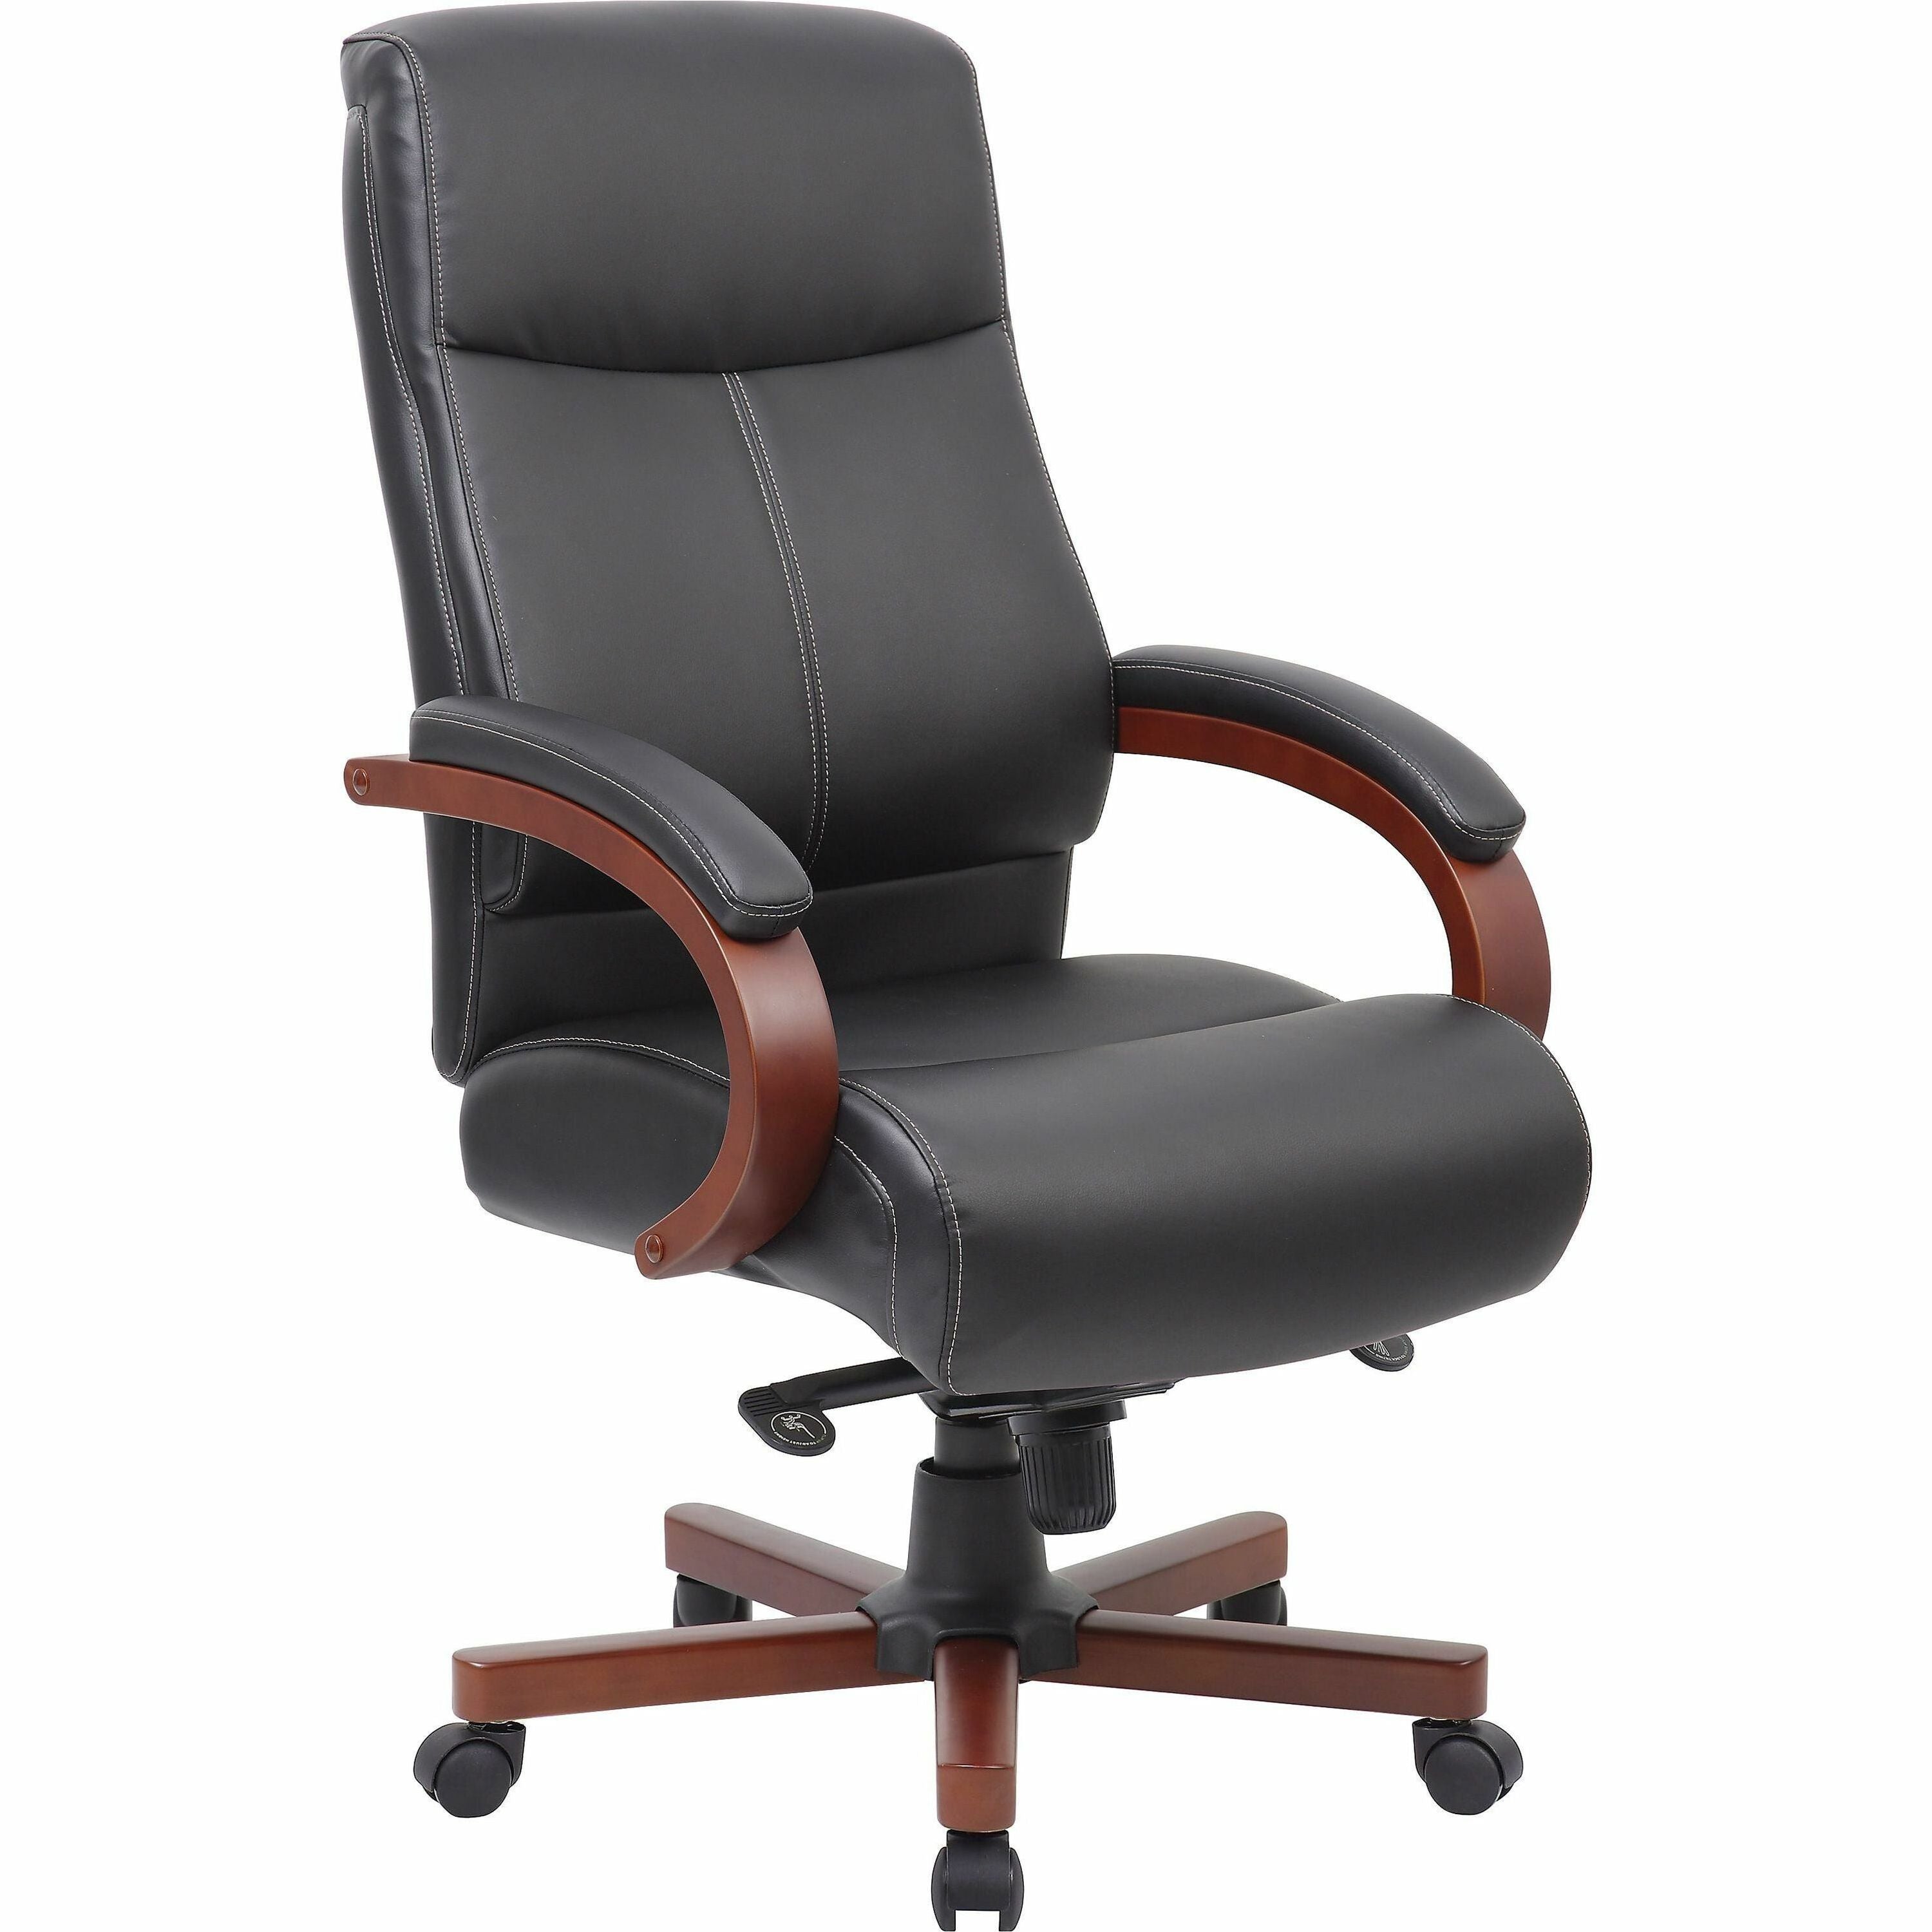 lorell-executive-high-back-wood-finish-office-chair-black-bonded-leather-seat-black-bonded-leather-back-high-back-black-mahogany-1-each_llr69532 - 1